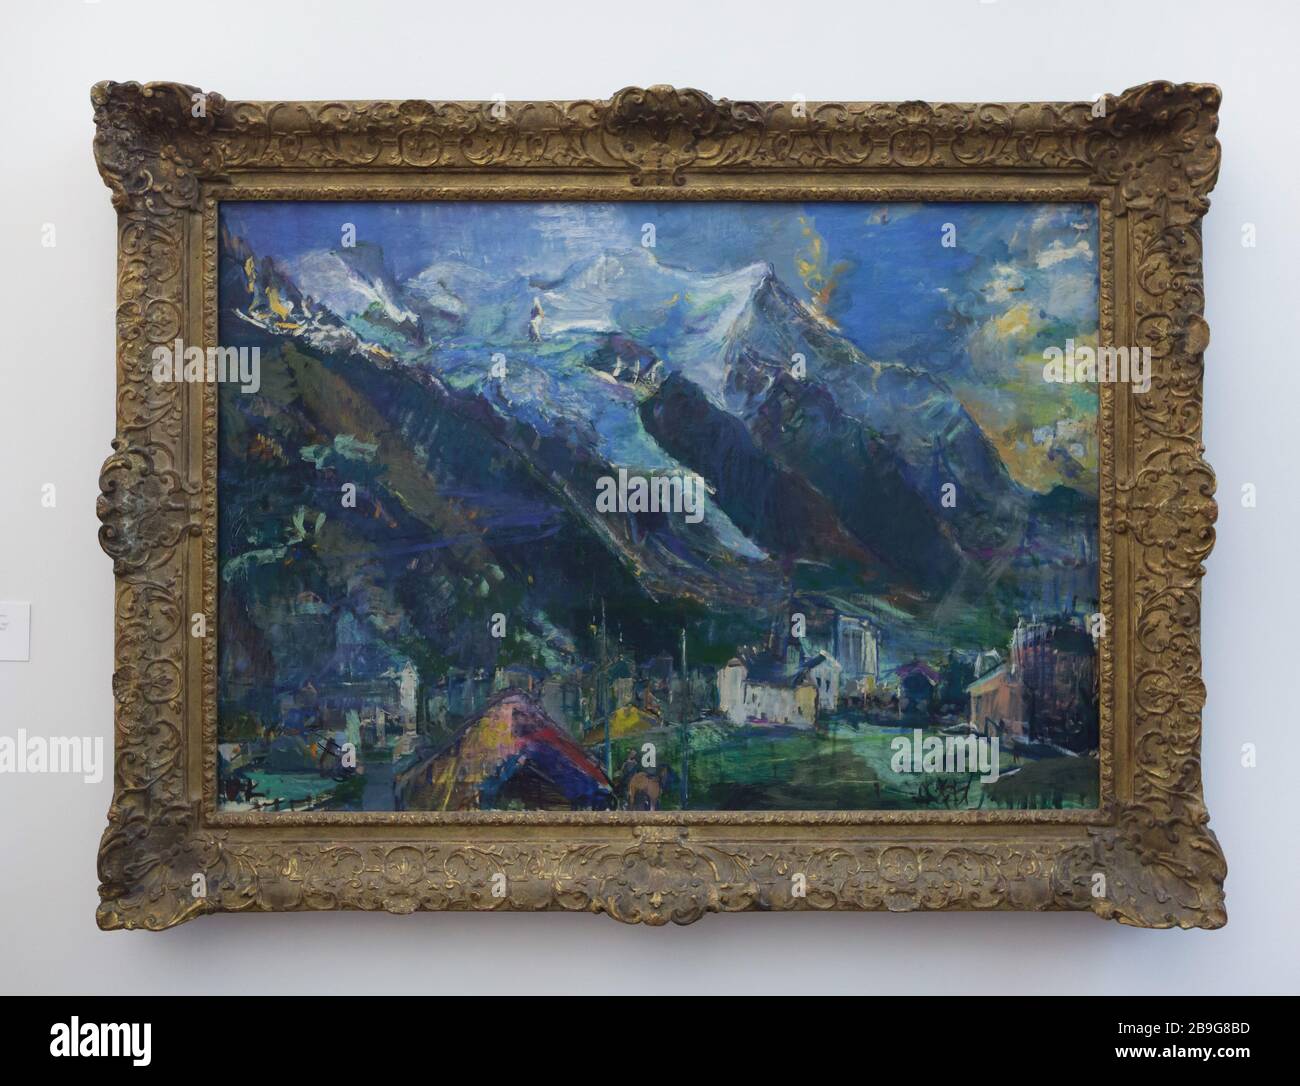 Painting 'View of Mont Blanc from Chamonix' by Austrian expressionist painter Oskar Kokoschka (1927) on display in the Staatliche Kunsthalle Karlsruhe (State Art Gallery) in Karlsruhe, Baden-Württemberg, Germany. Stock Photo